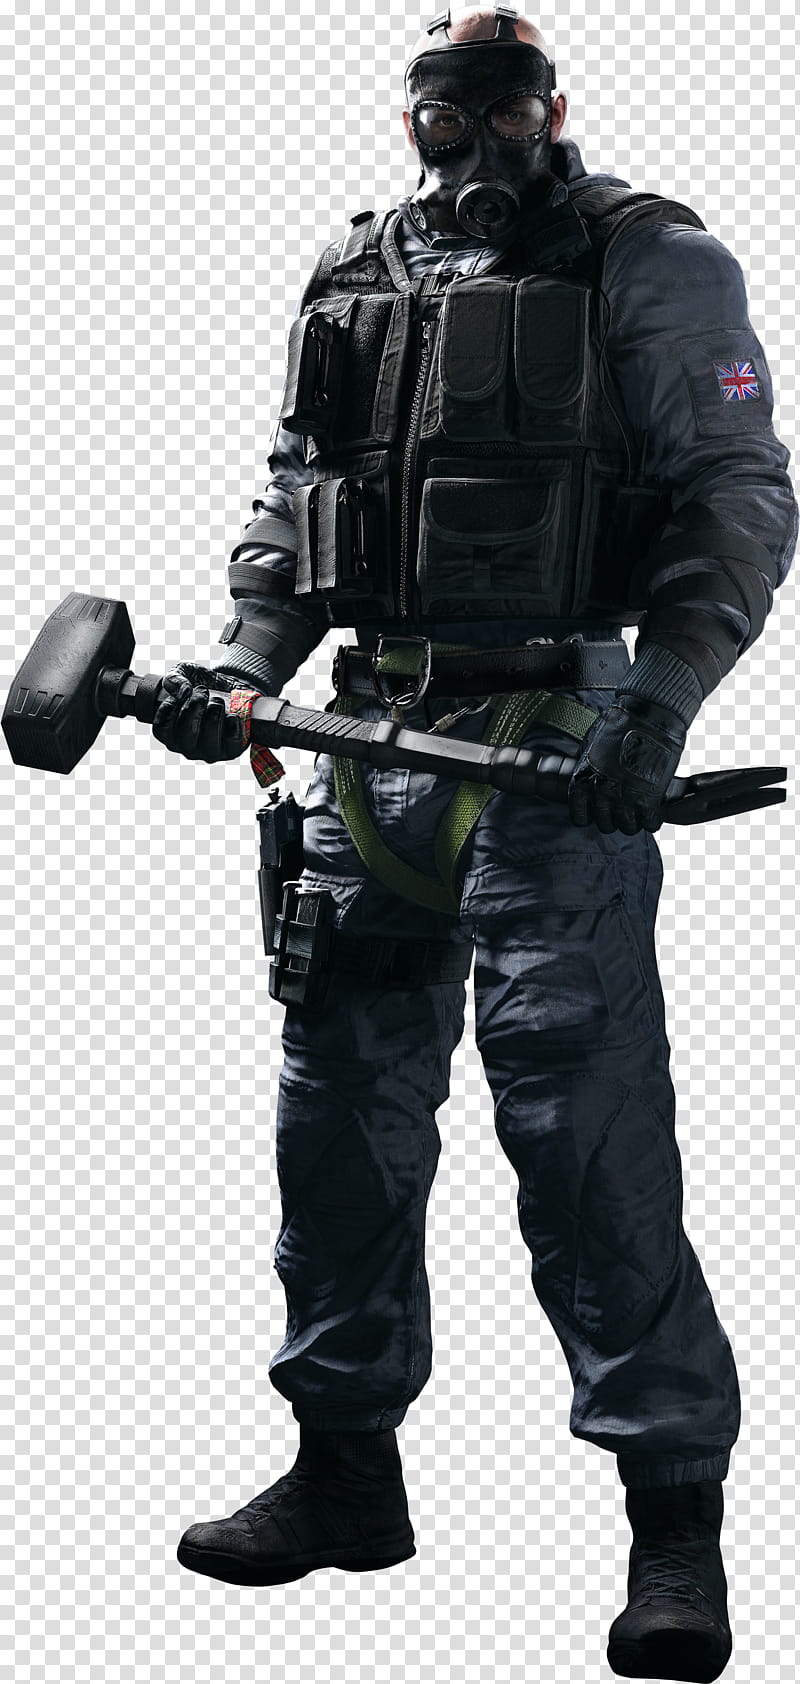 Cartoon Rainbow, Tom Clancys Rainbow Six, Video Games, Tom Clancys The Division, Ubisoft, Rainbow Six Siege Operation Blood Orchid, Ubisoft Montreal, Tom Clancys Rainbow Six Siege transparent background PNG clipart